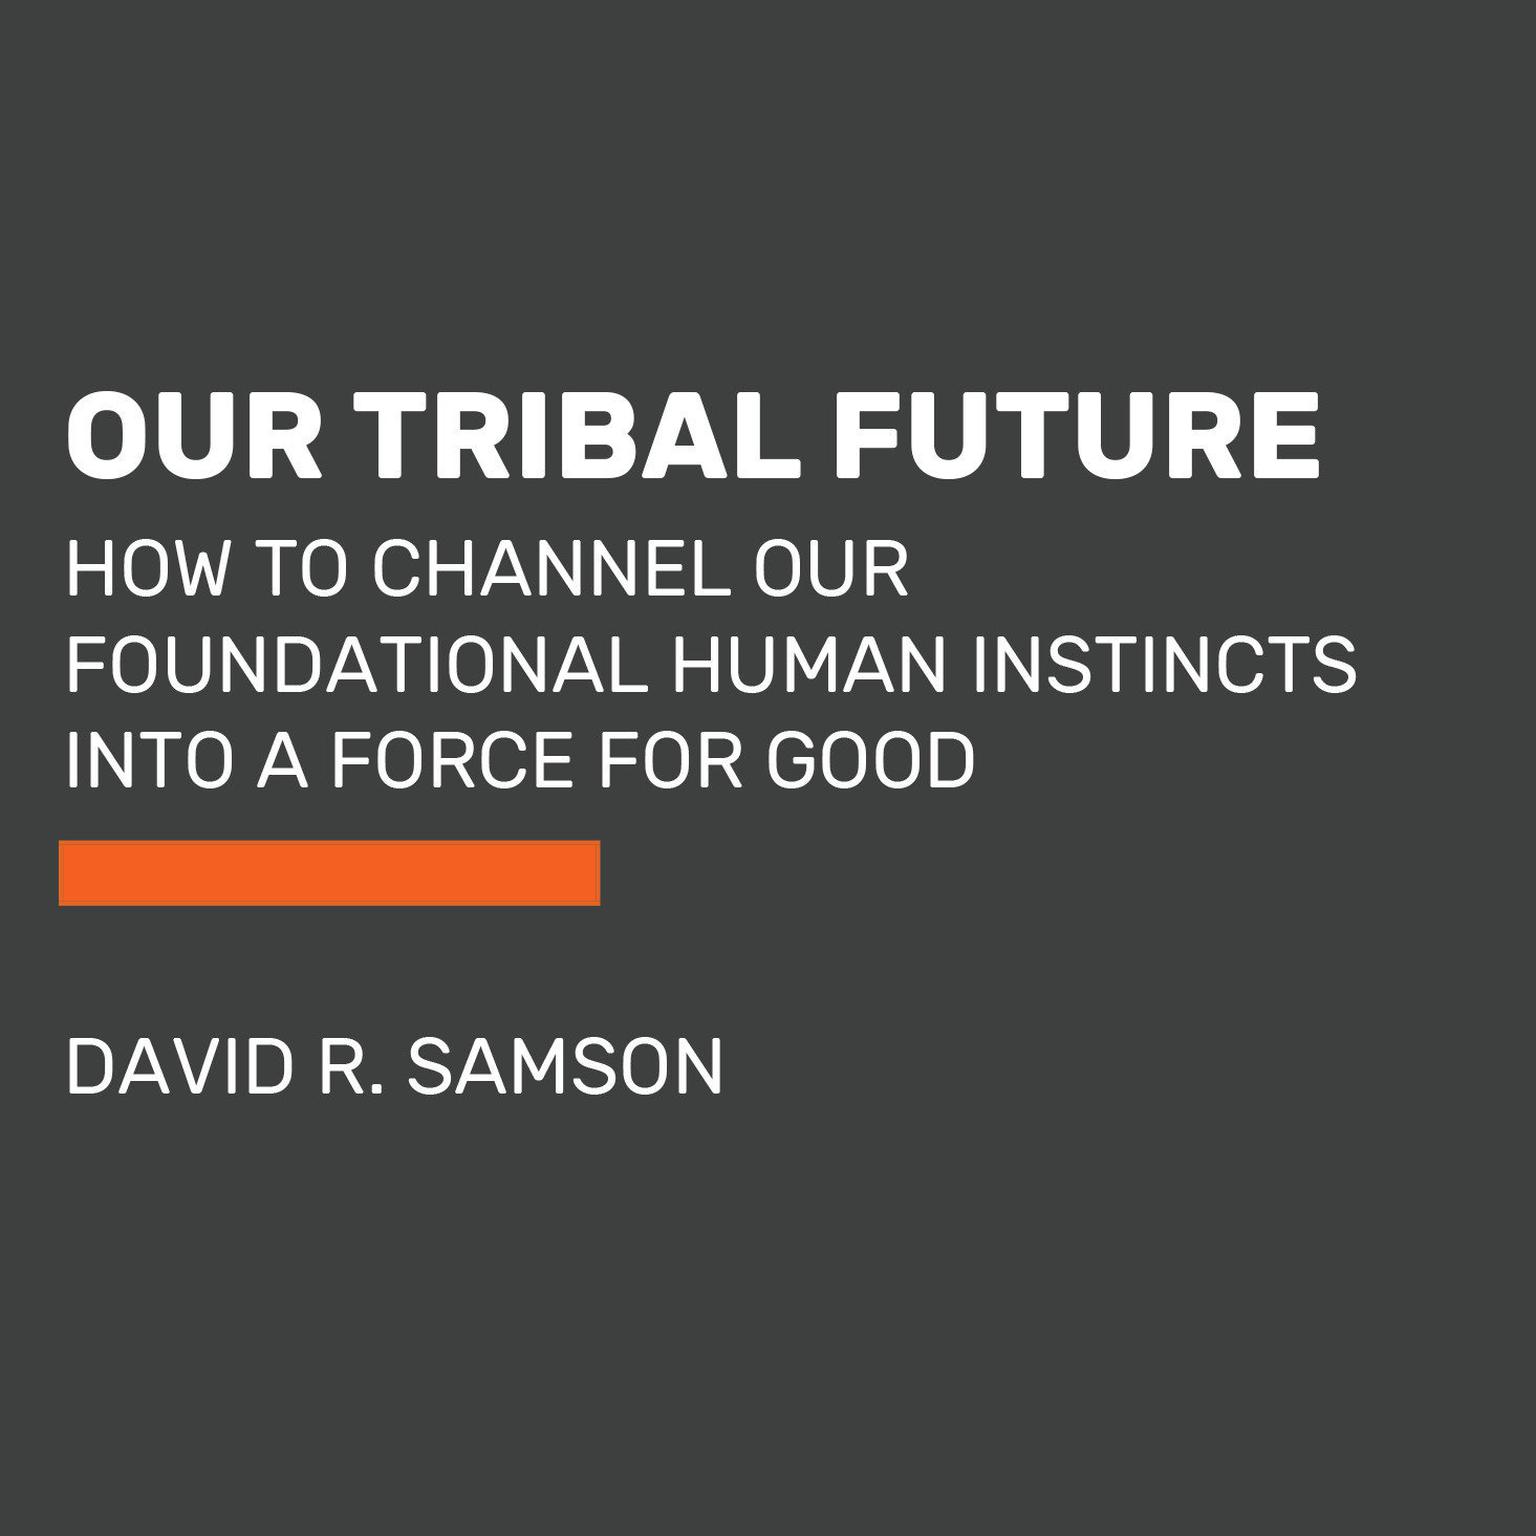 Our Tribal Future: How to Channel Our Foundational Human Instincts into a Force for Good Audiobook, by David R. Samson